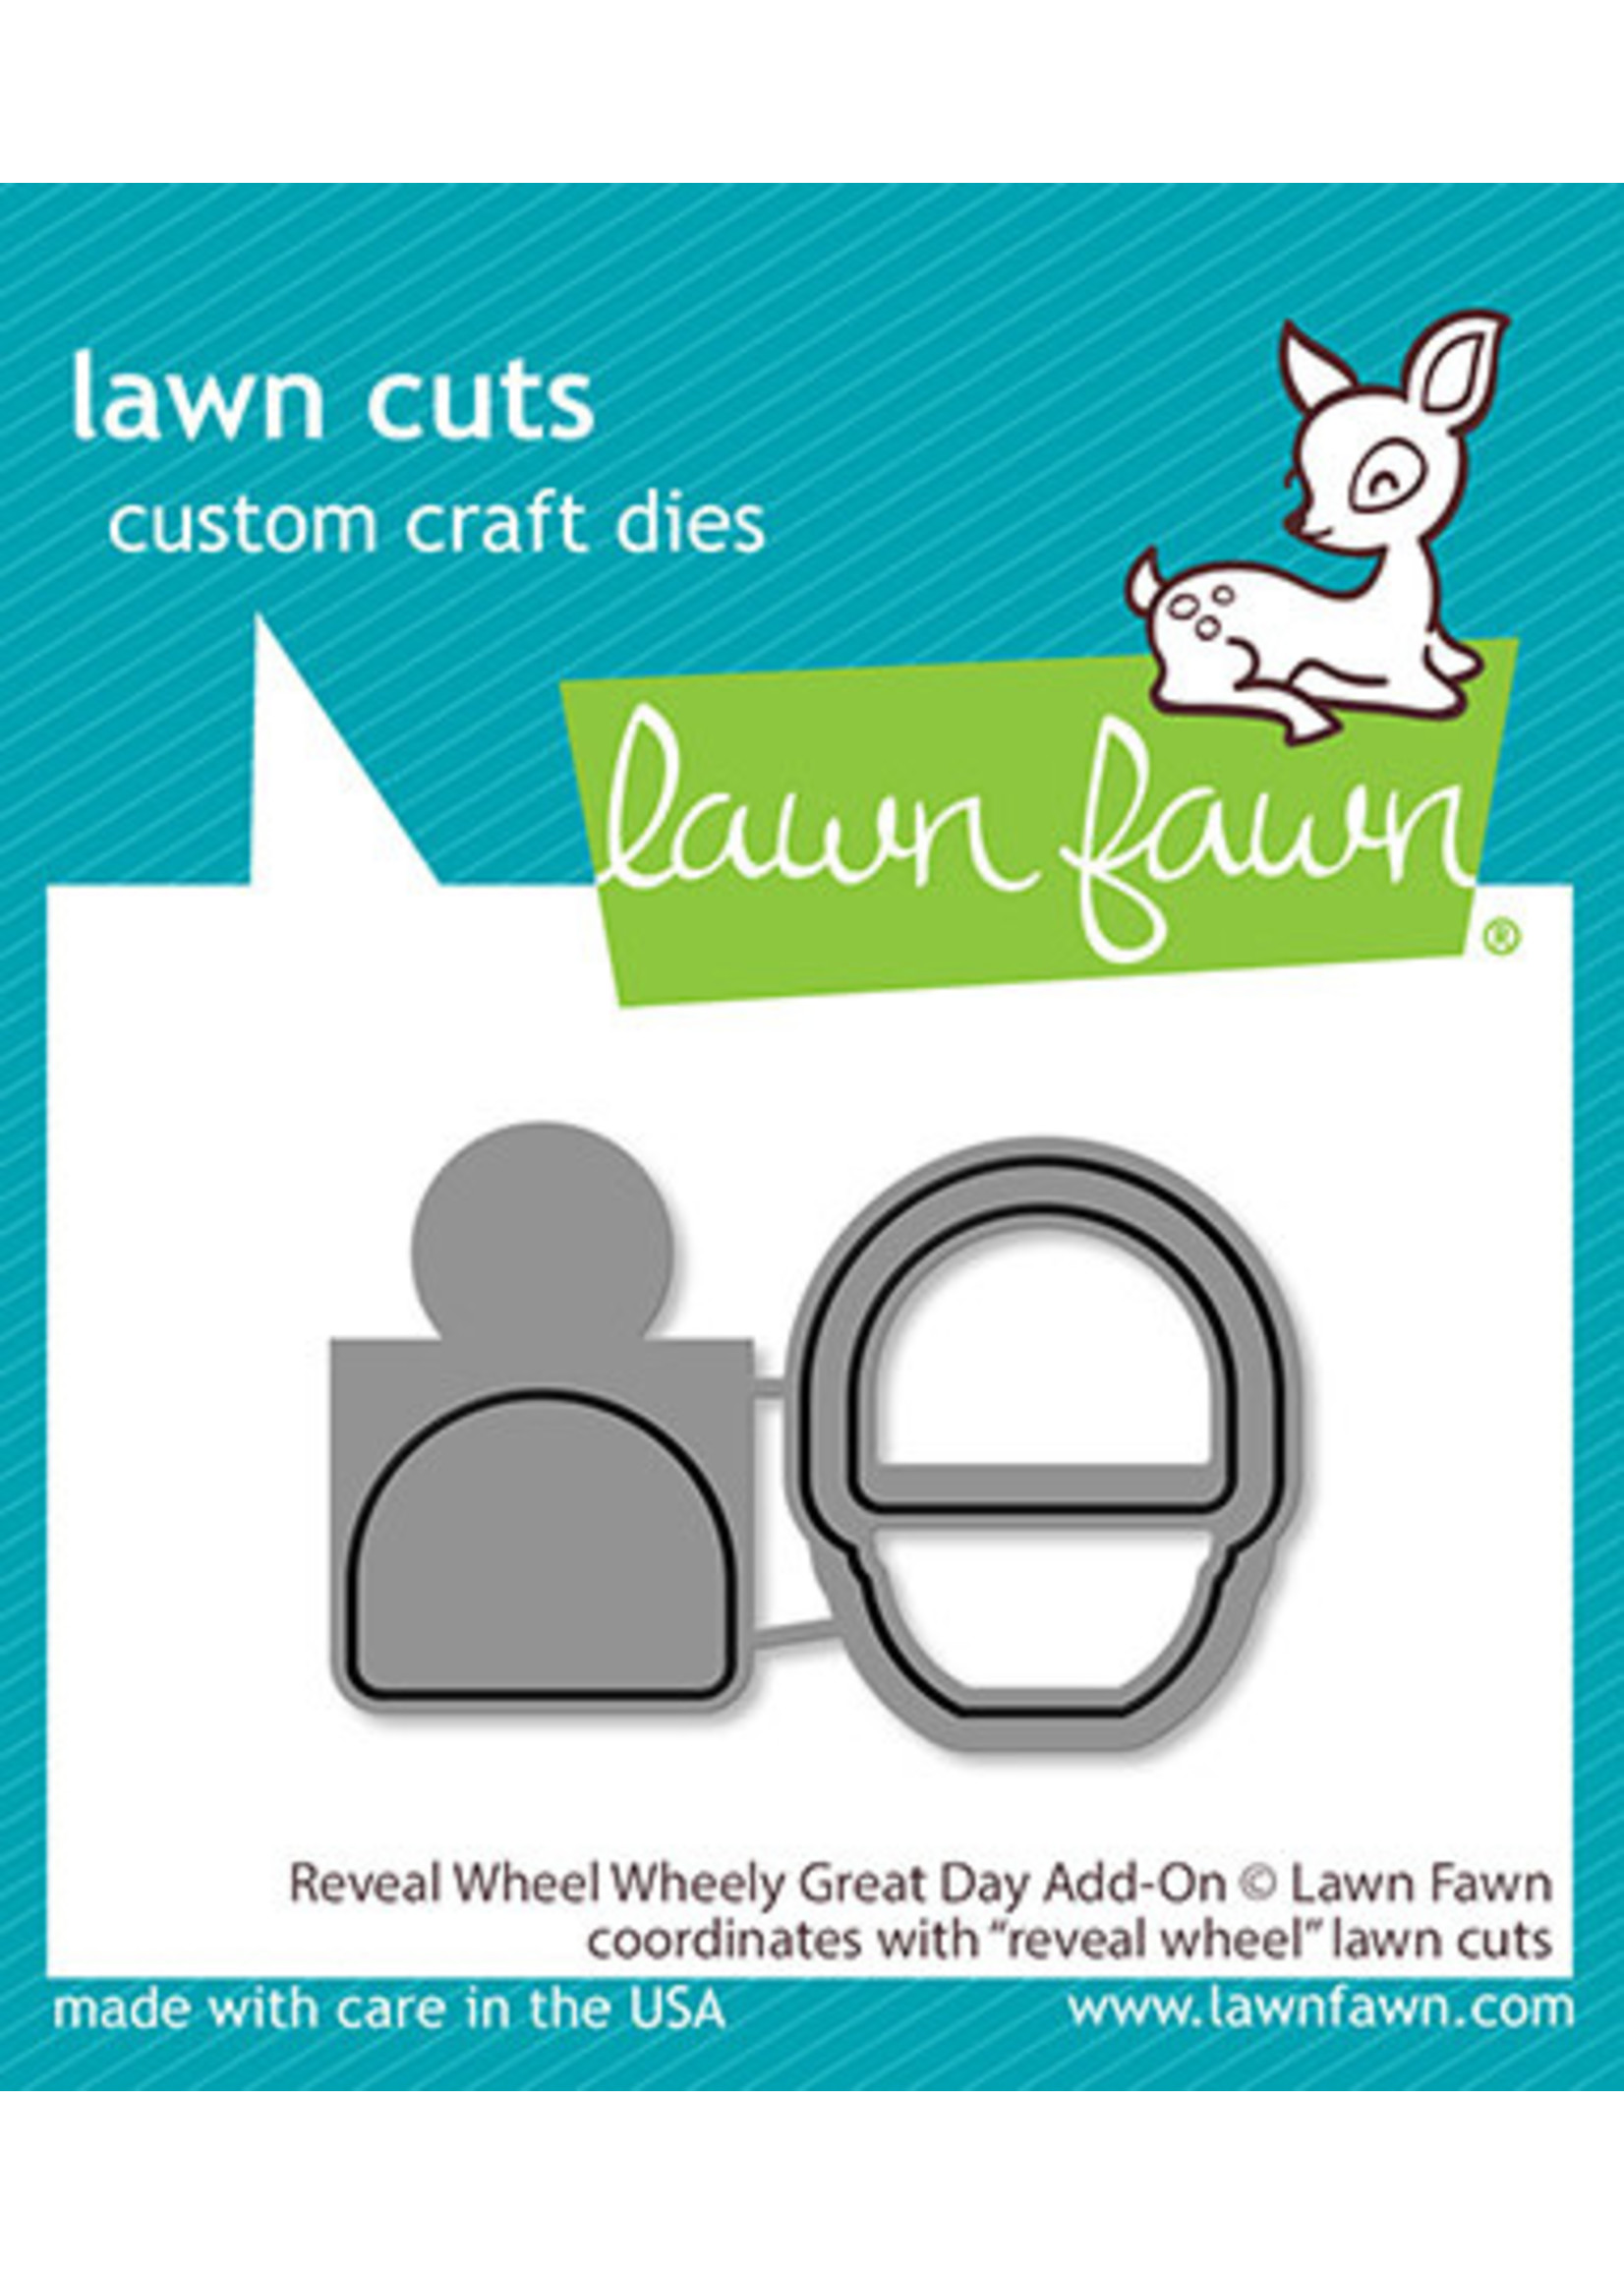 Lawn Fawn Reveal Wheel Wheely Great Day Add-On